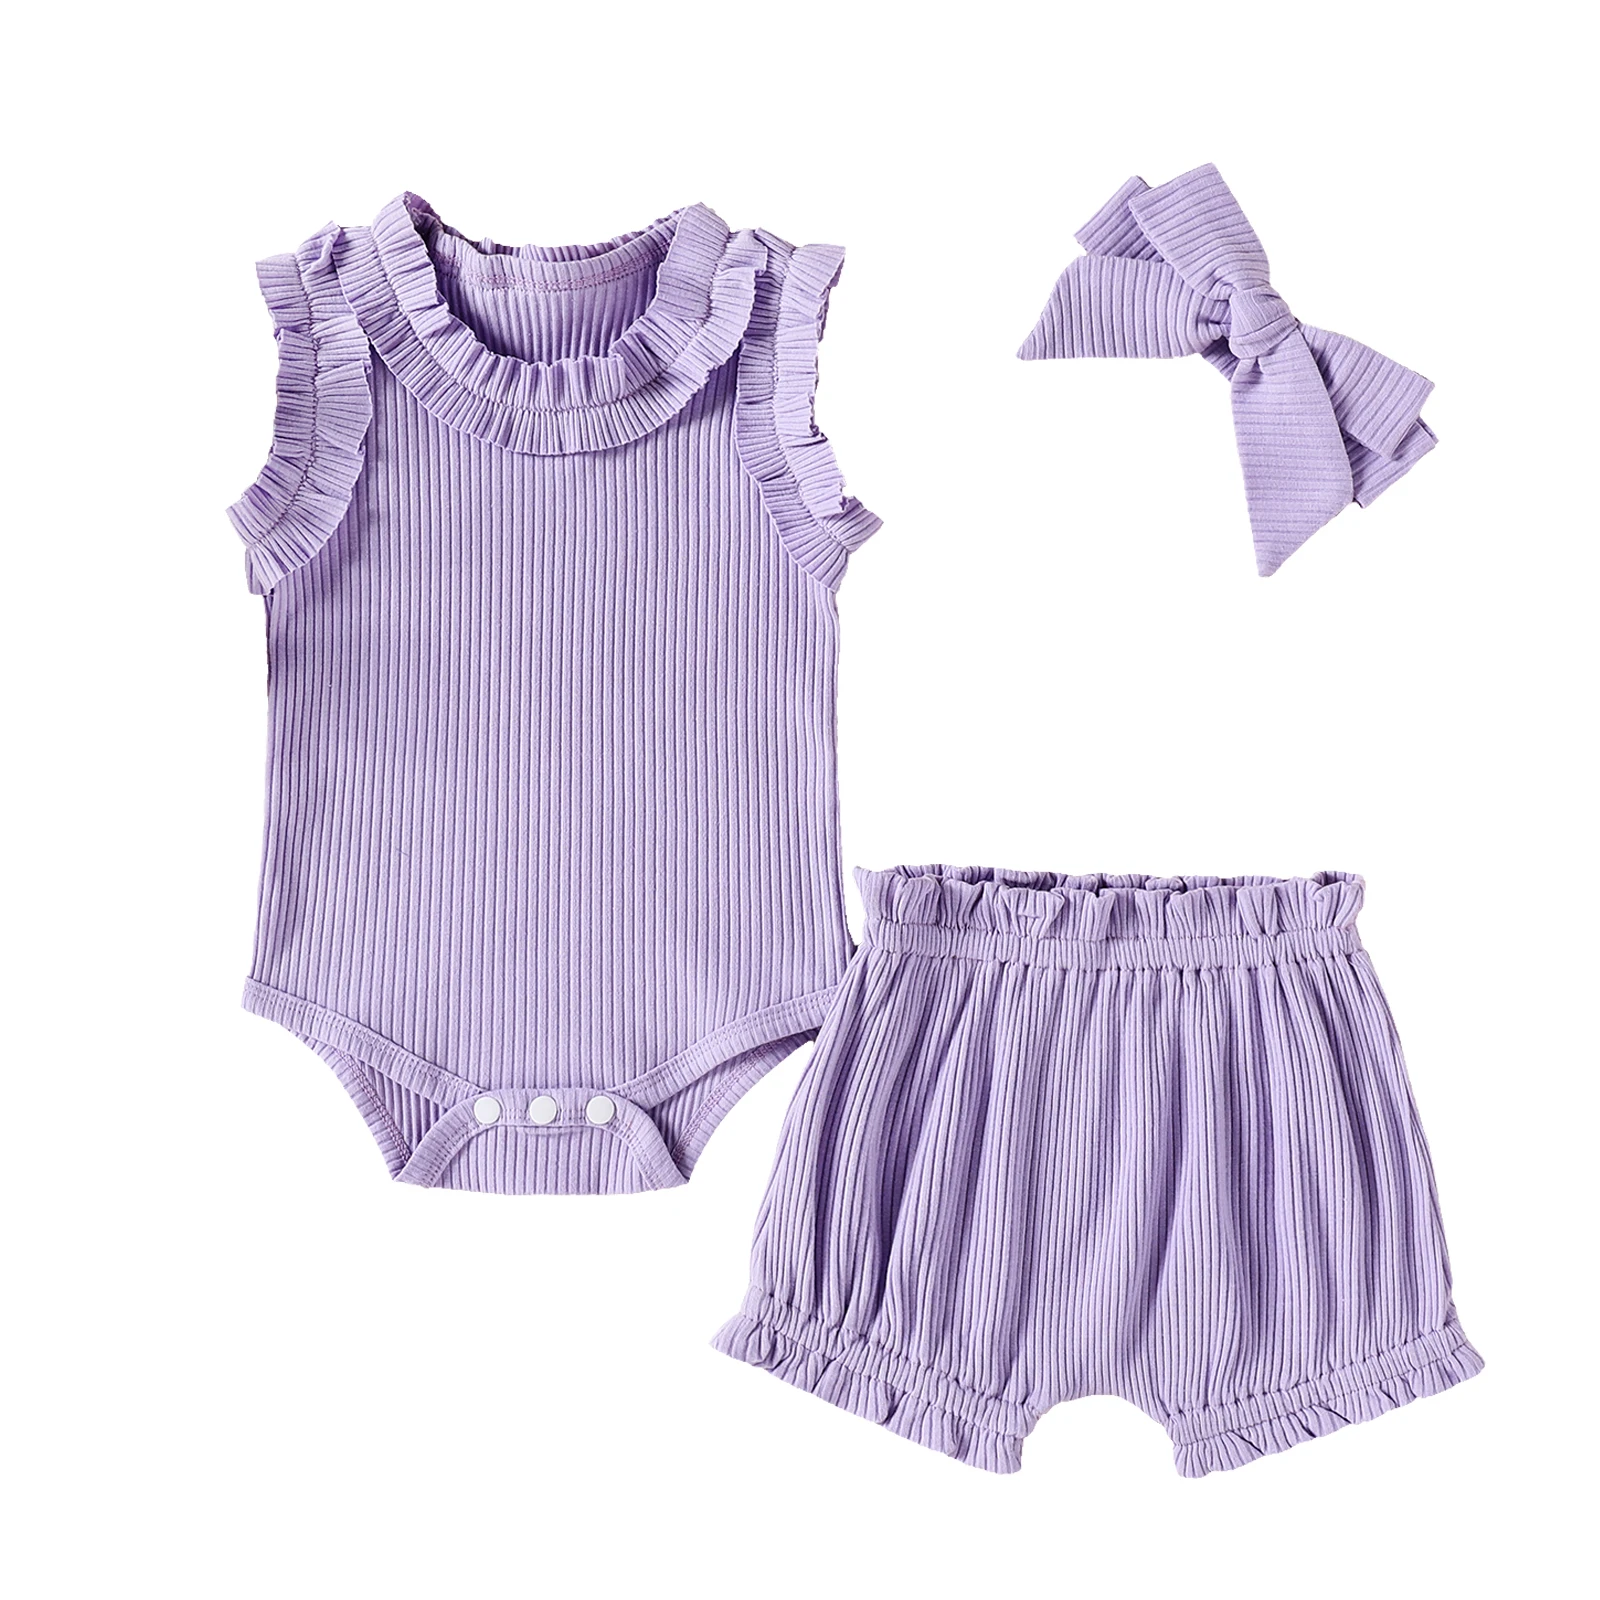 Newborn Baby Girls Three Piece Set, Infant's Ribbed Knit Solid Color Ruffled Romper Stretch Shorts Bow Hair Band 0-18M baby clothing set essentials Baby Clothing Set